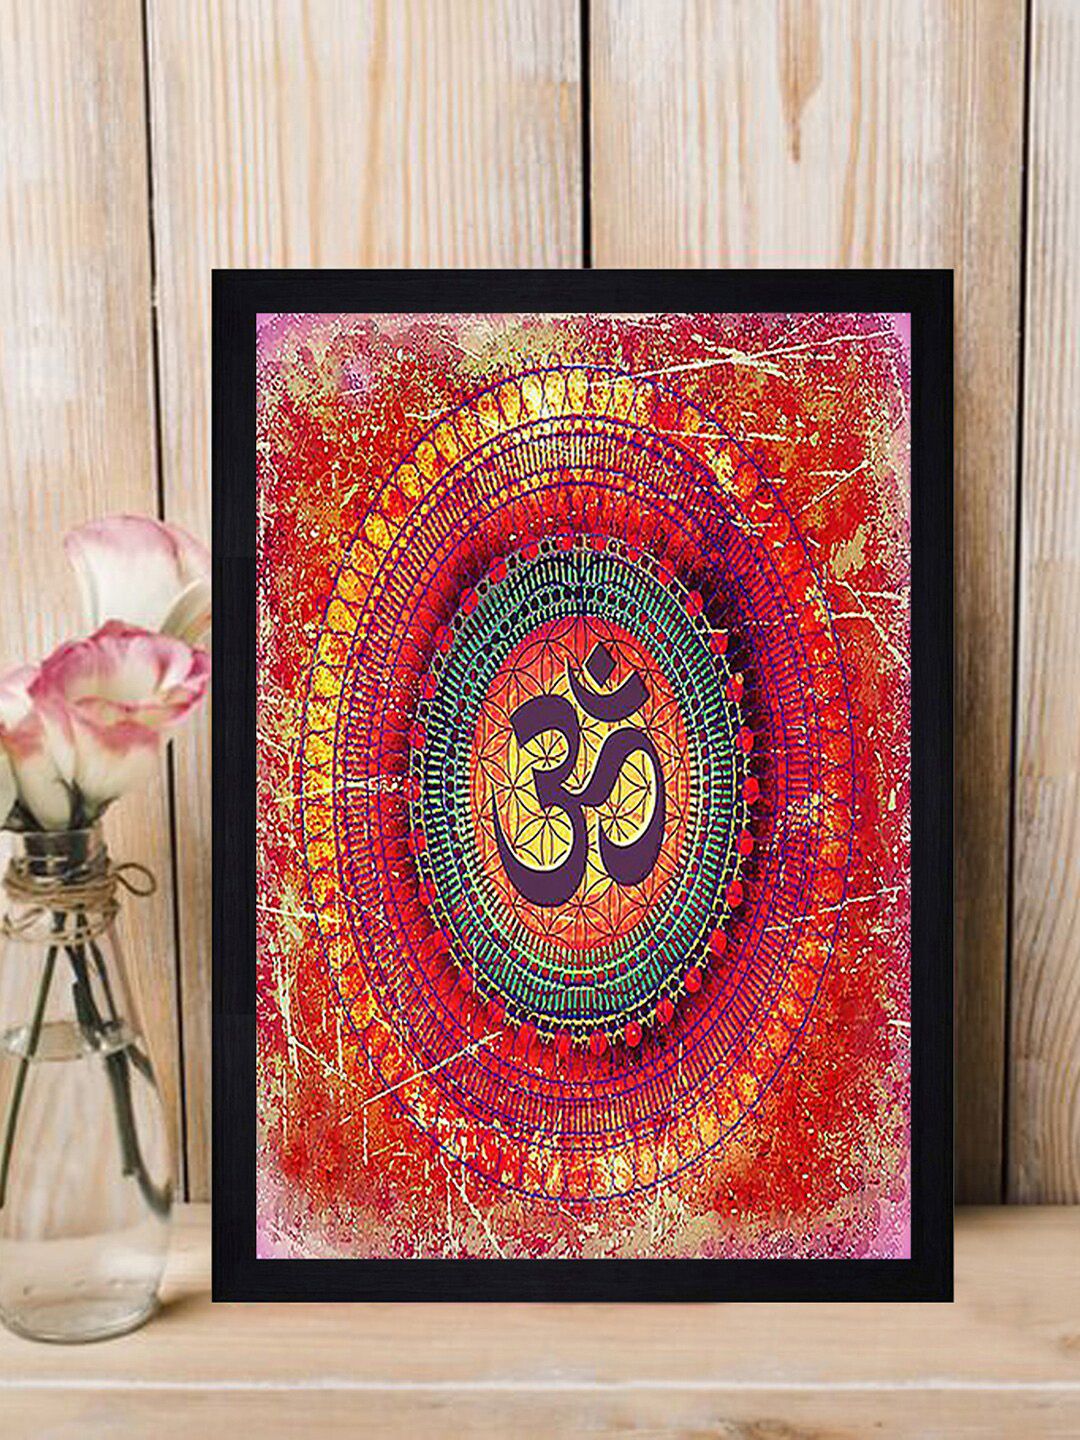 Gallery99 Red Om Mantra Texture Paper Framed Wall Hanging Price in India